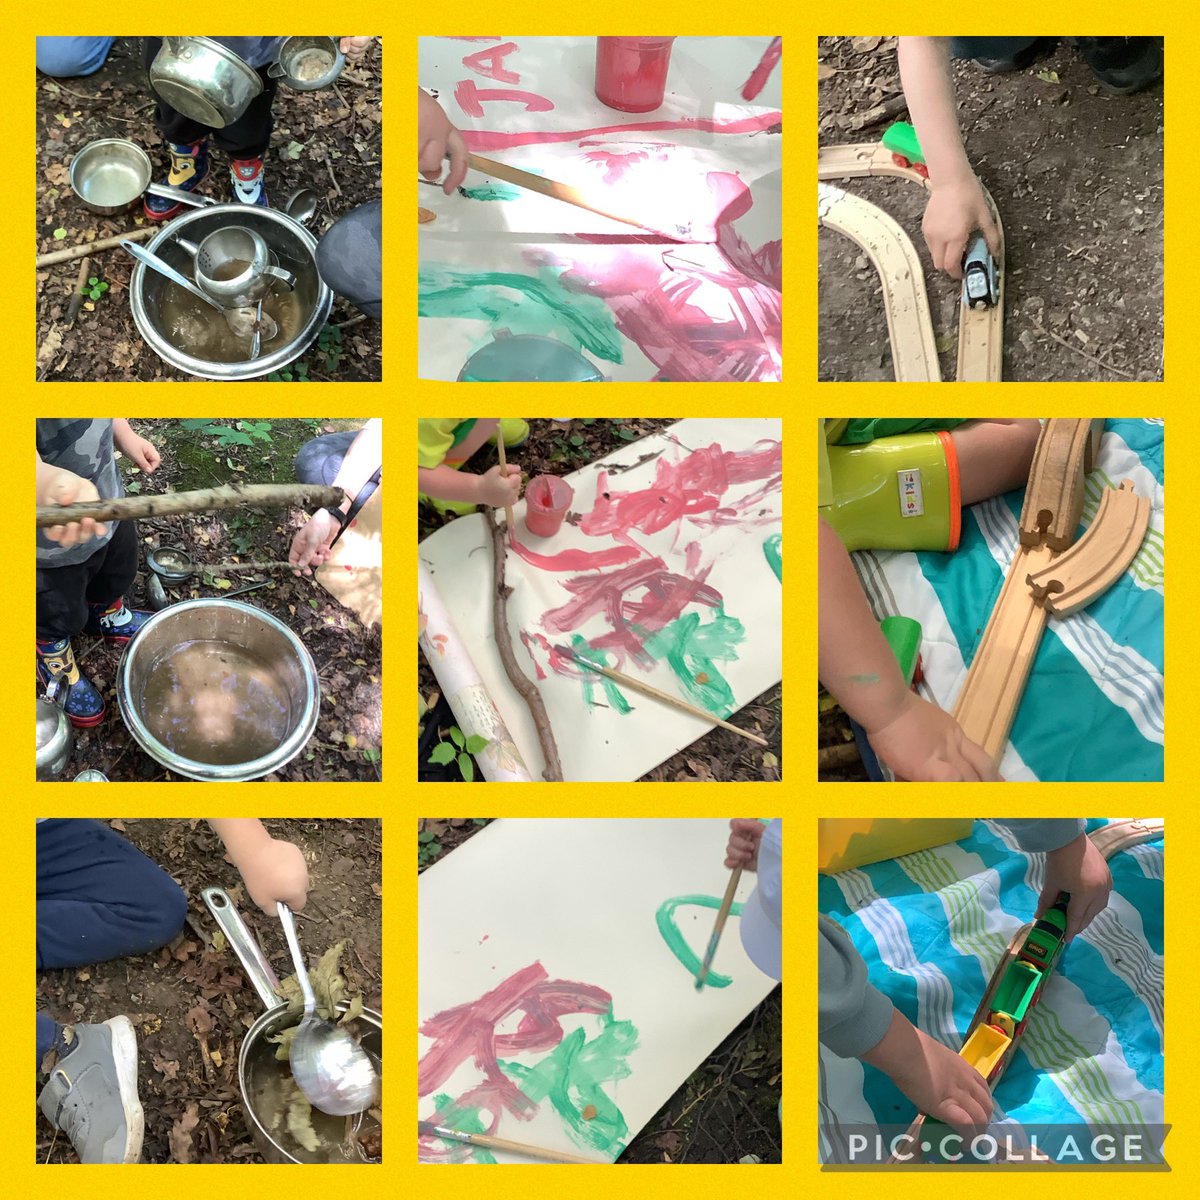 Our new FS1 friend had a great time on Play Shop 2! We enjoyed a woodland walk, made mud soup, painted animals and made train tracks across the forest floor! #EYFS #outdoorlearning @SHINEmulti